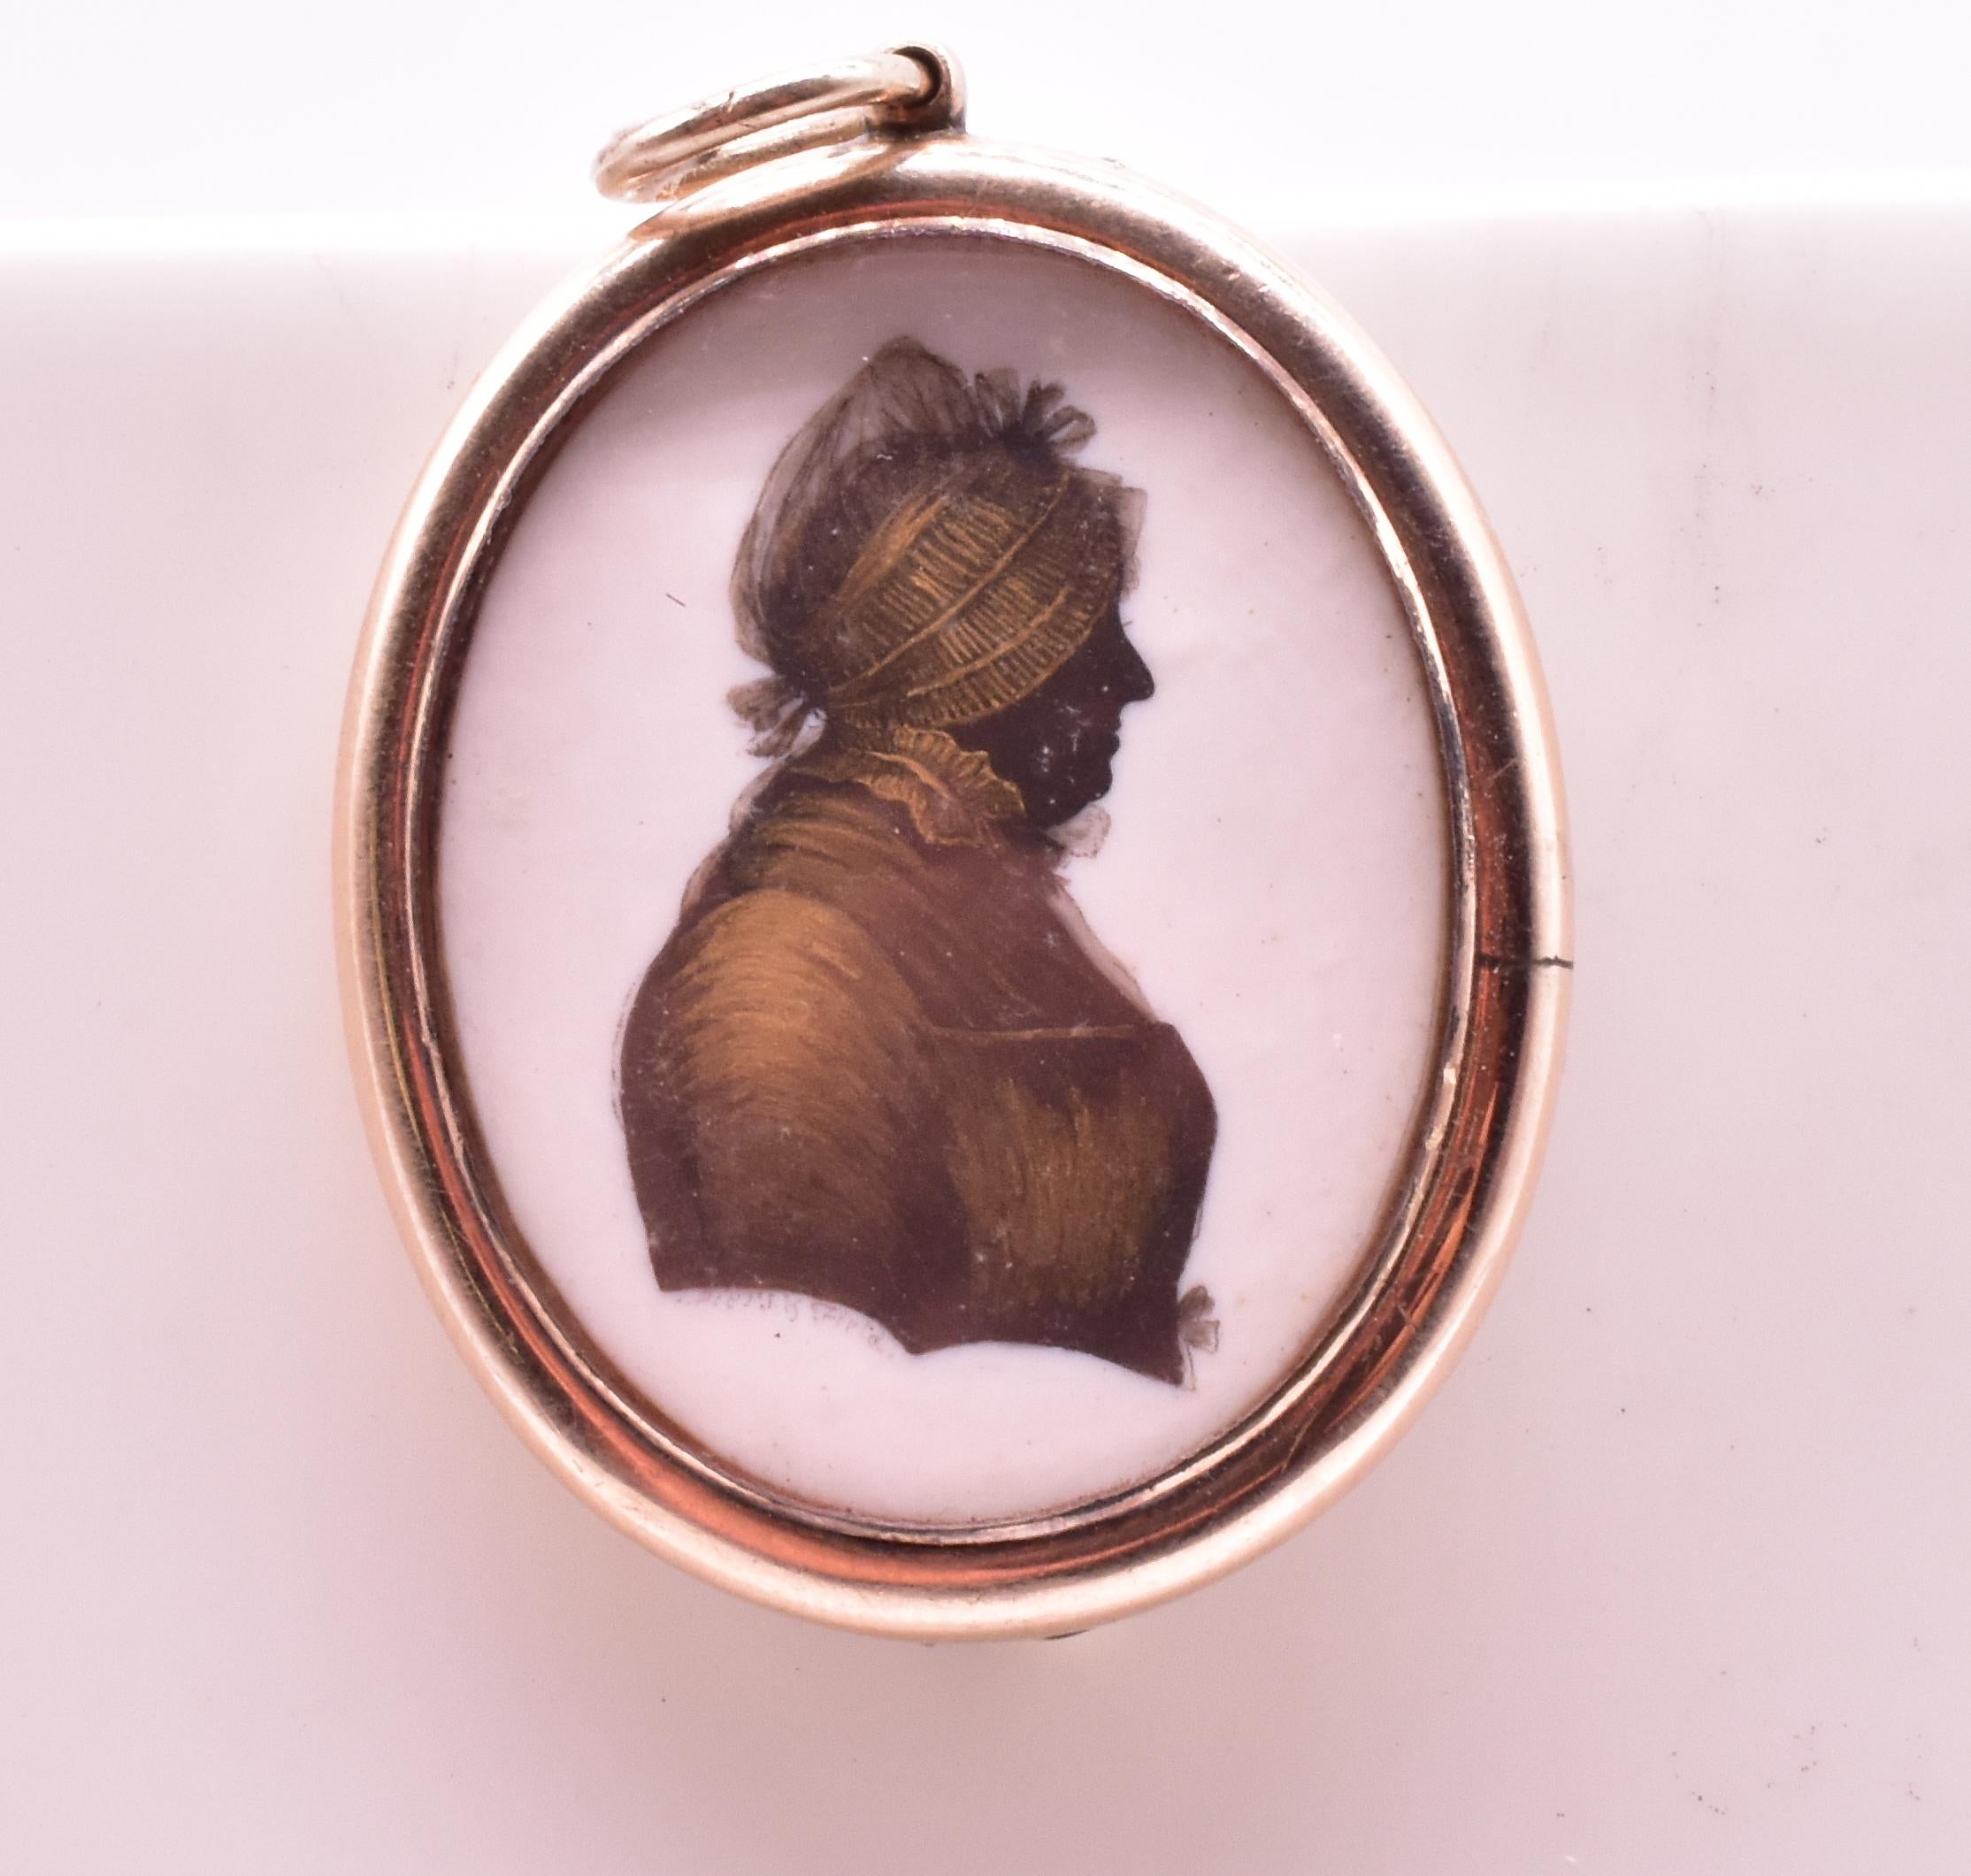 Portrait miniatures reached their peak of popularity during the 18th century. They served the same purpose as small photographs of our loved ones do today. Their small size made them accessible for carrying around, and they were often mounted in